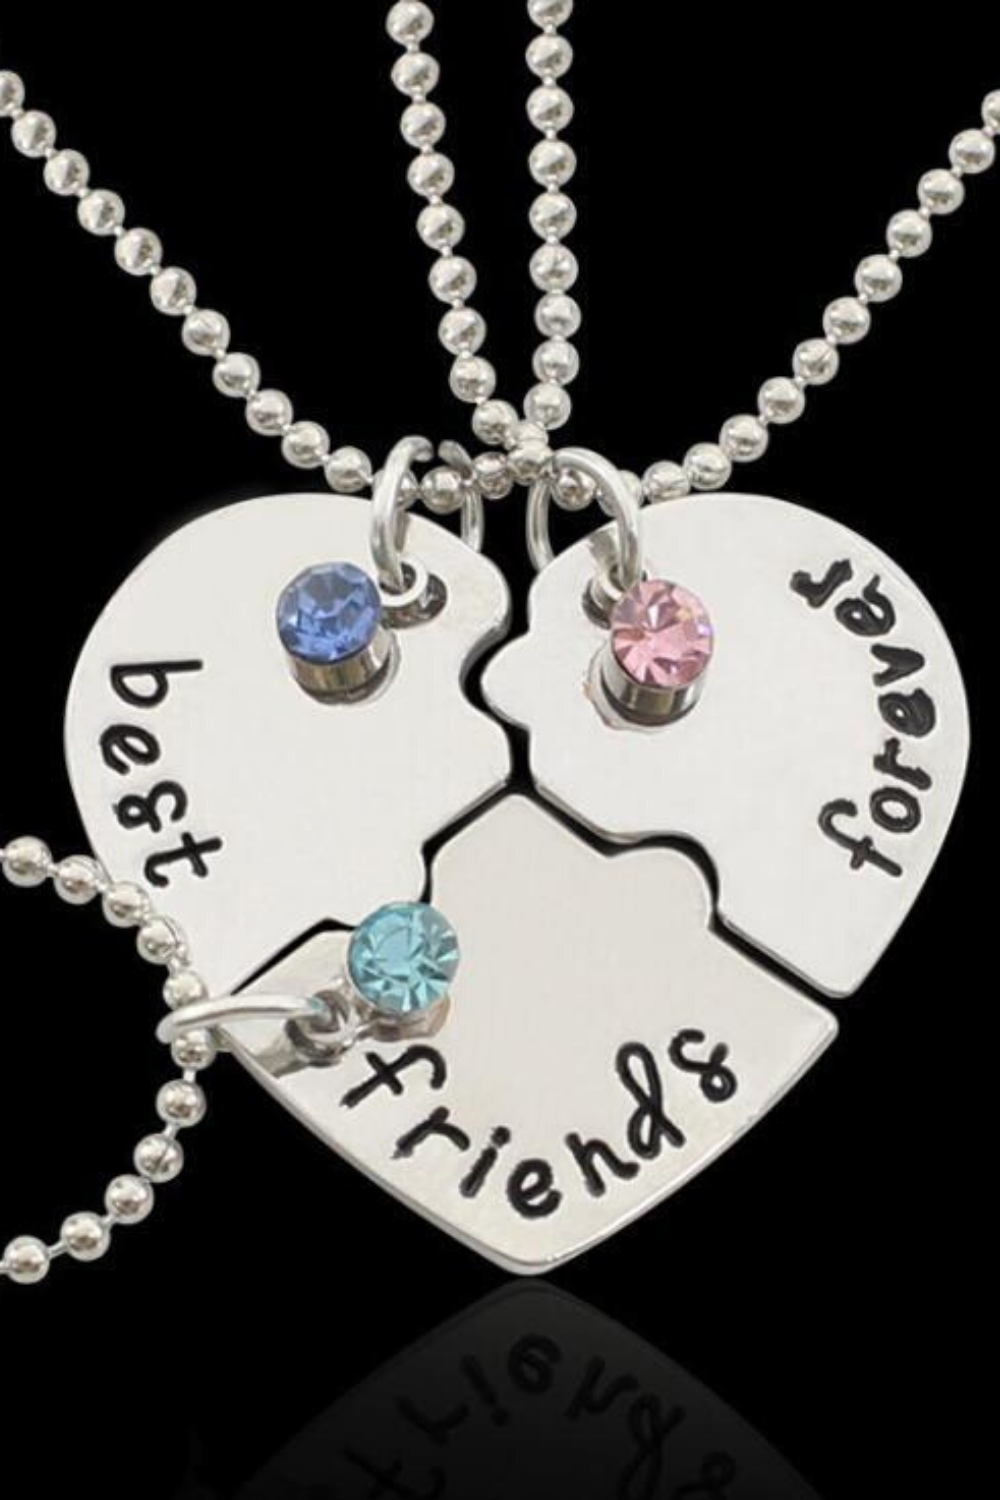 Best Friends Forever Heart Puzzle Matching Necklace Set Of 3. Best Friend Jewelry, Cute Jewelry, Matching Necklaces